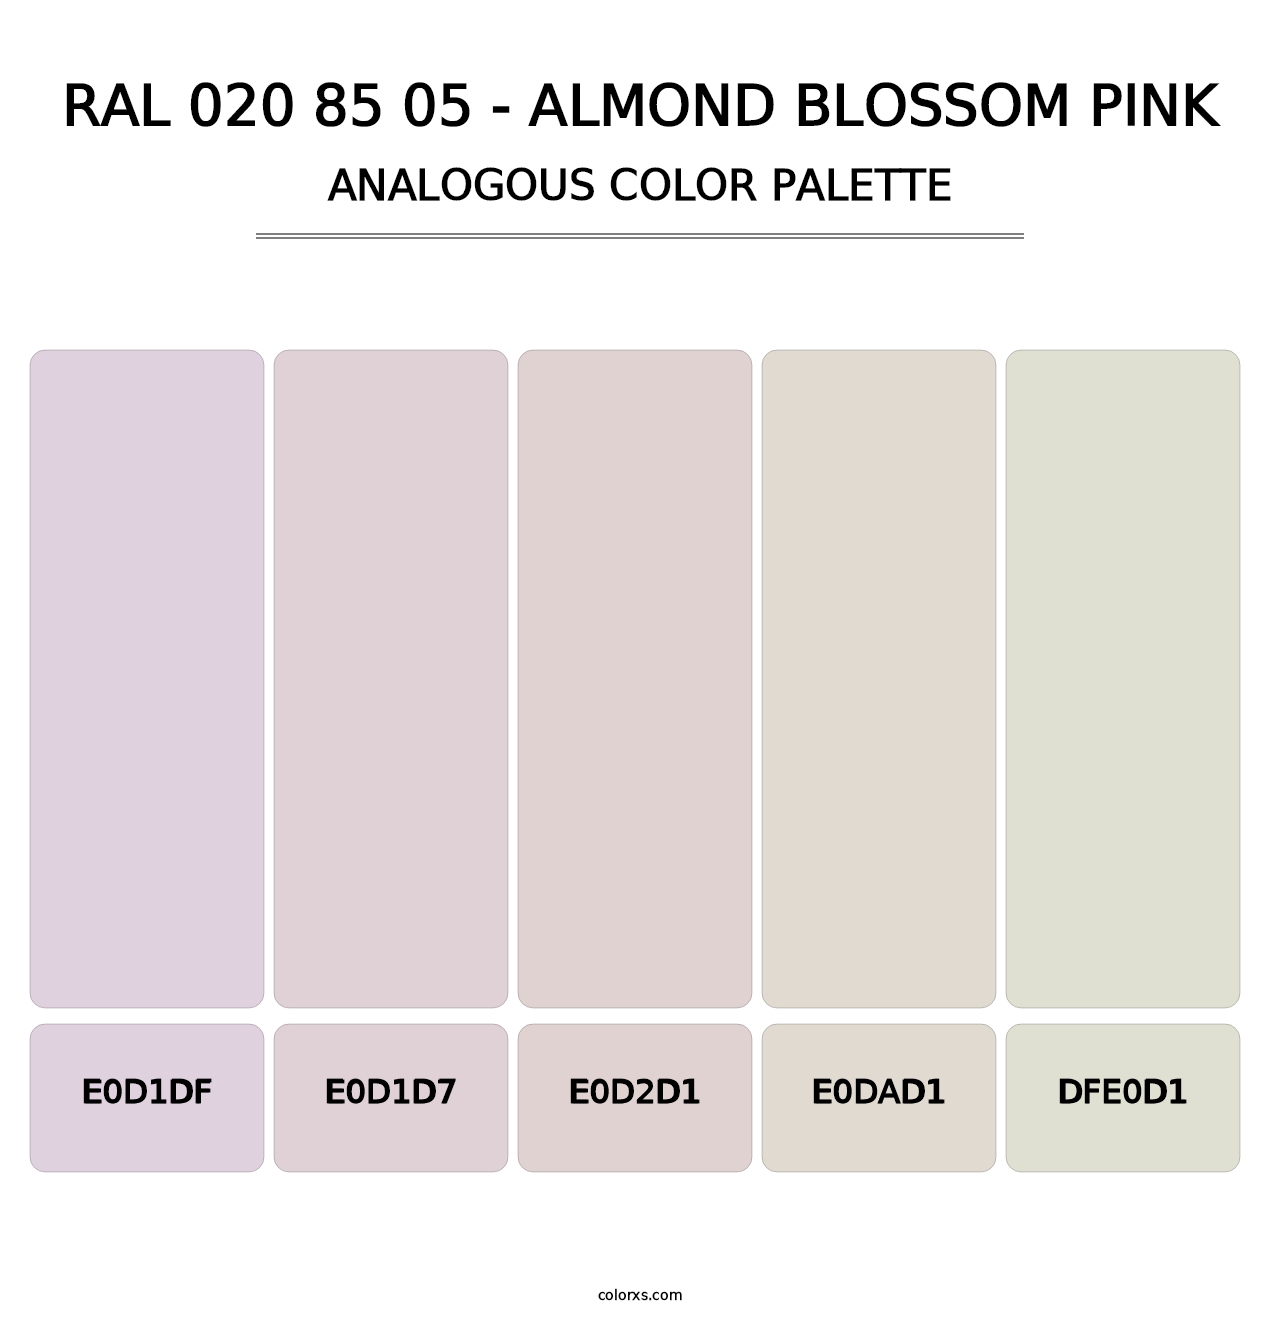 RAL 020 85 05 - Almond Blossom Pink - Analogous Color Palette